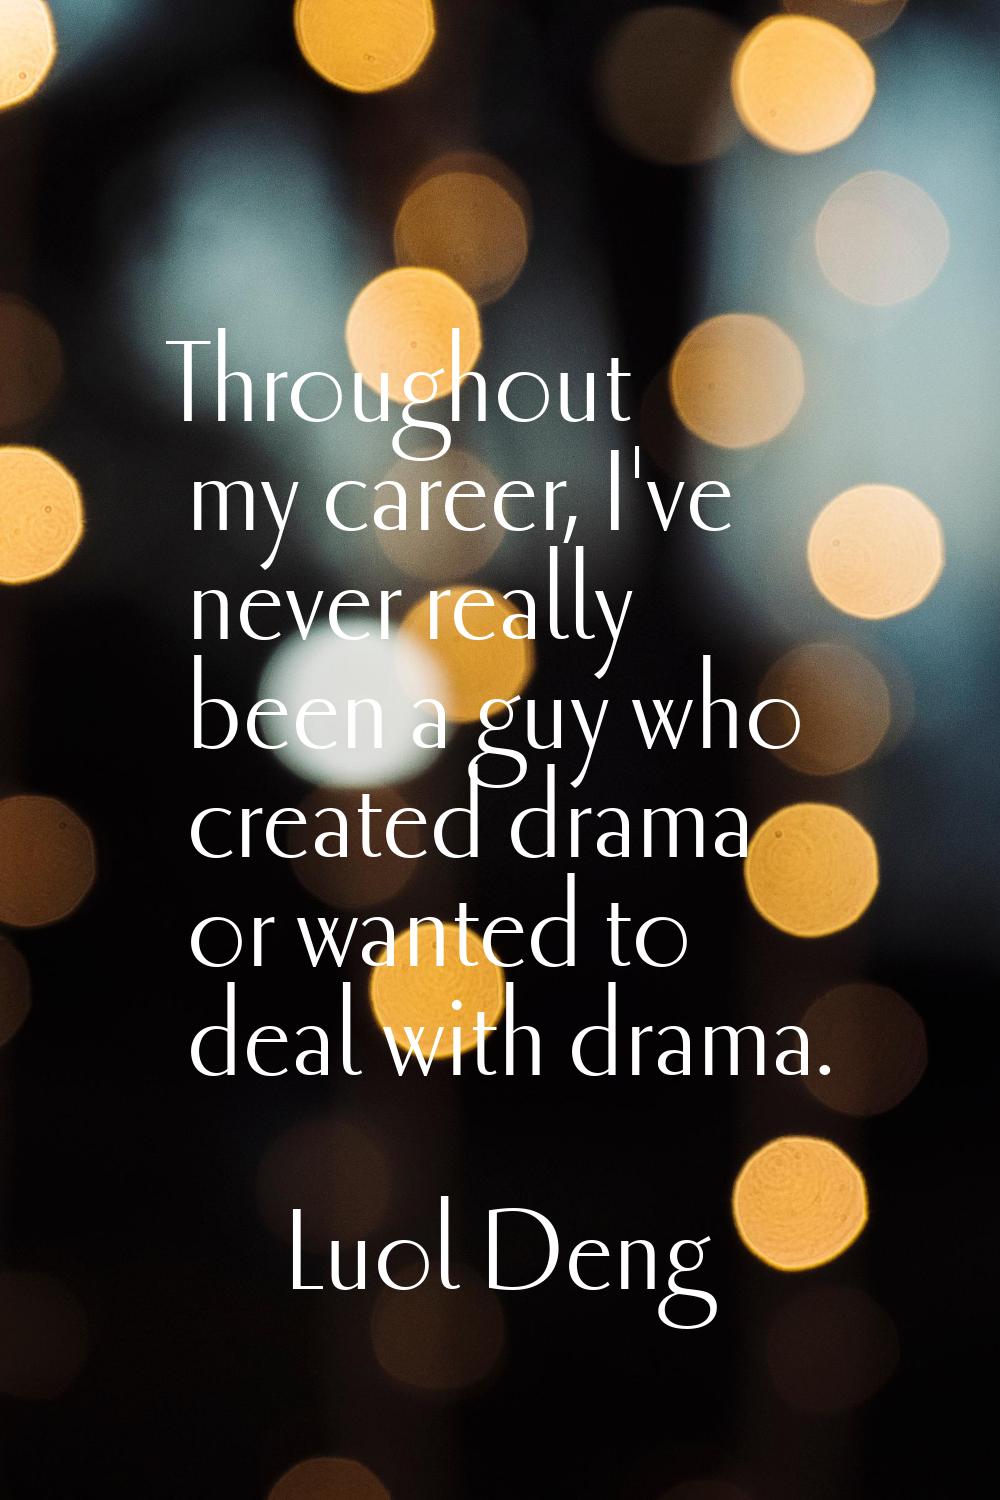 Throughout my career, I've never really been a guy who created drama or wanted to deal with drama.